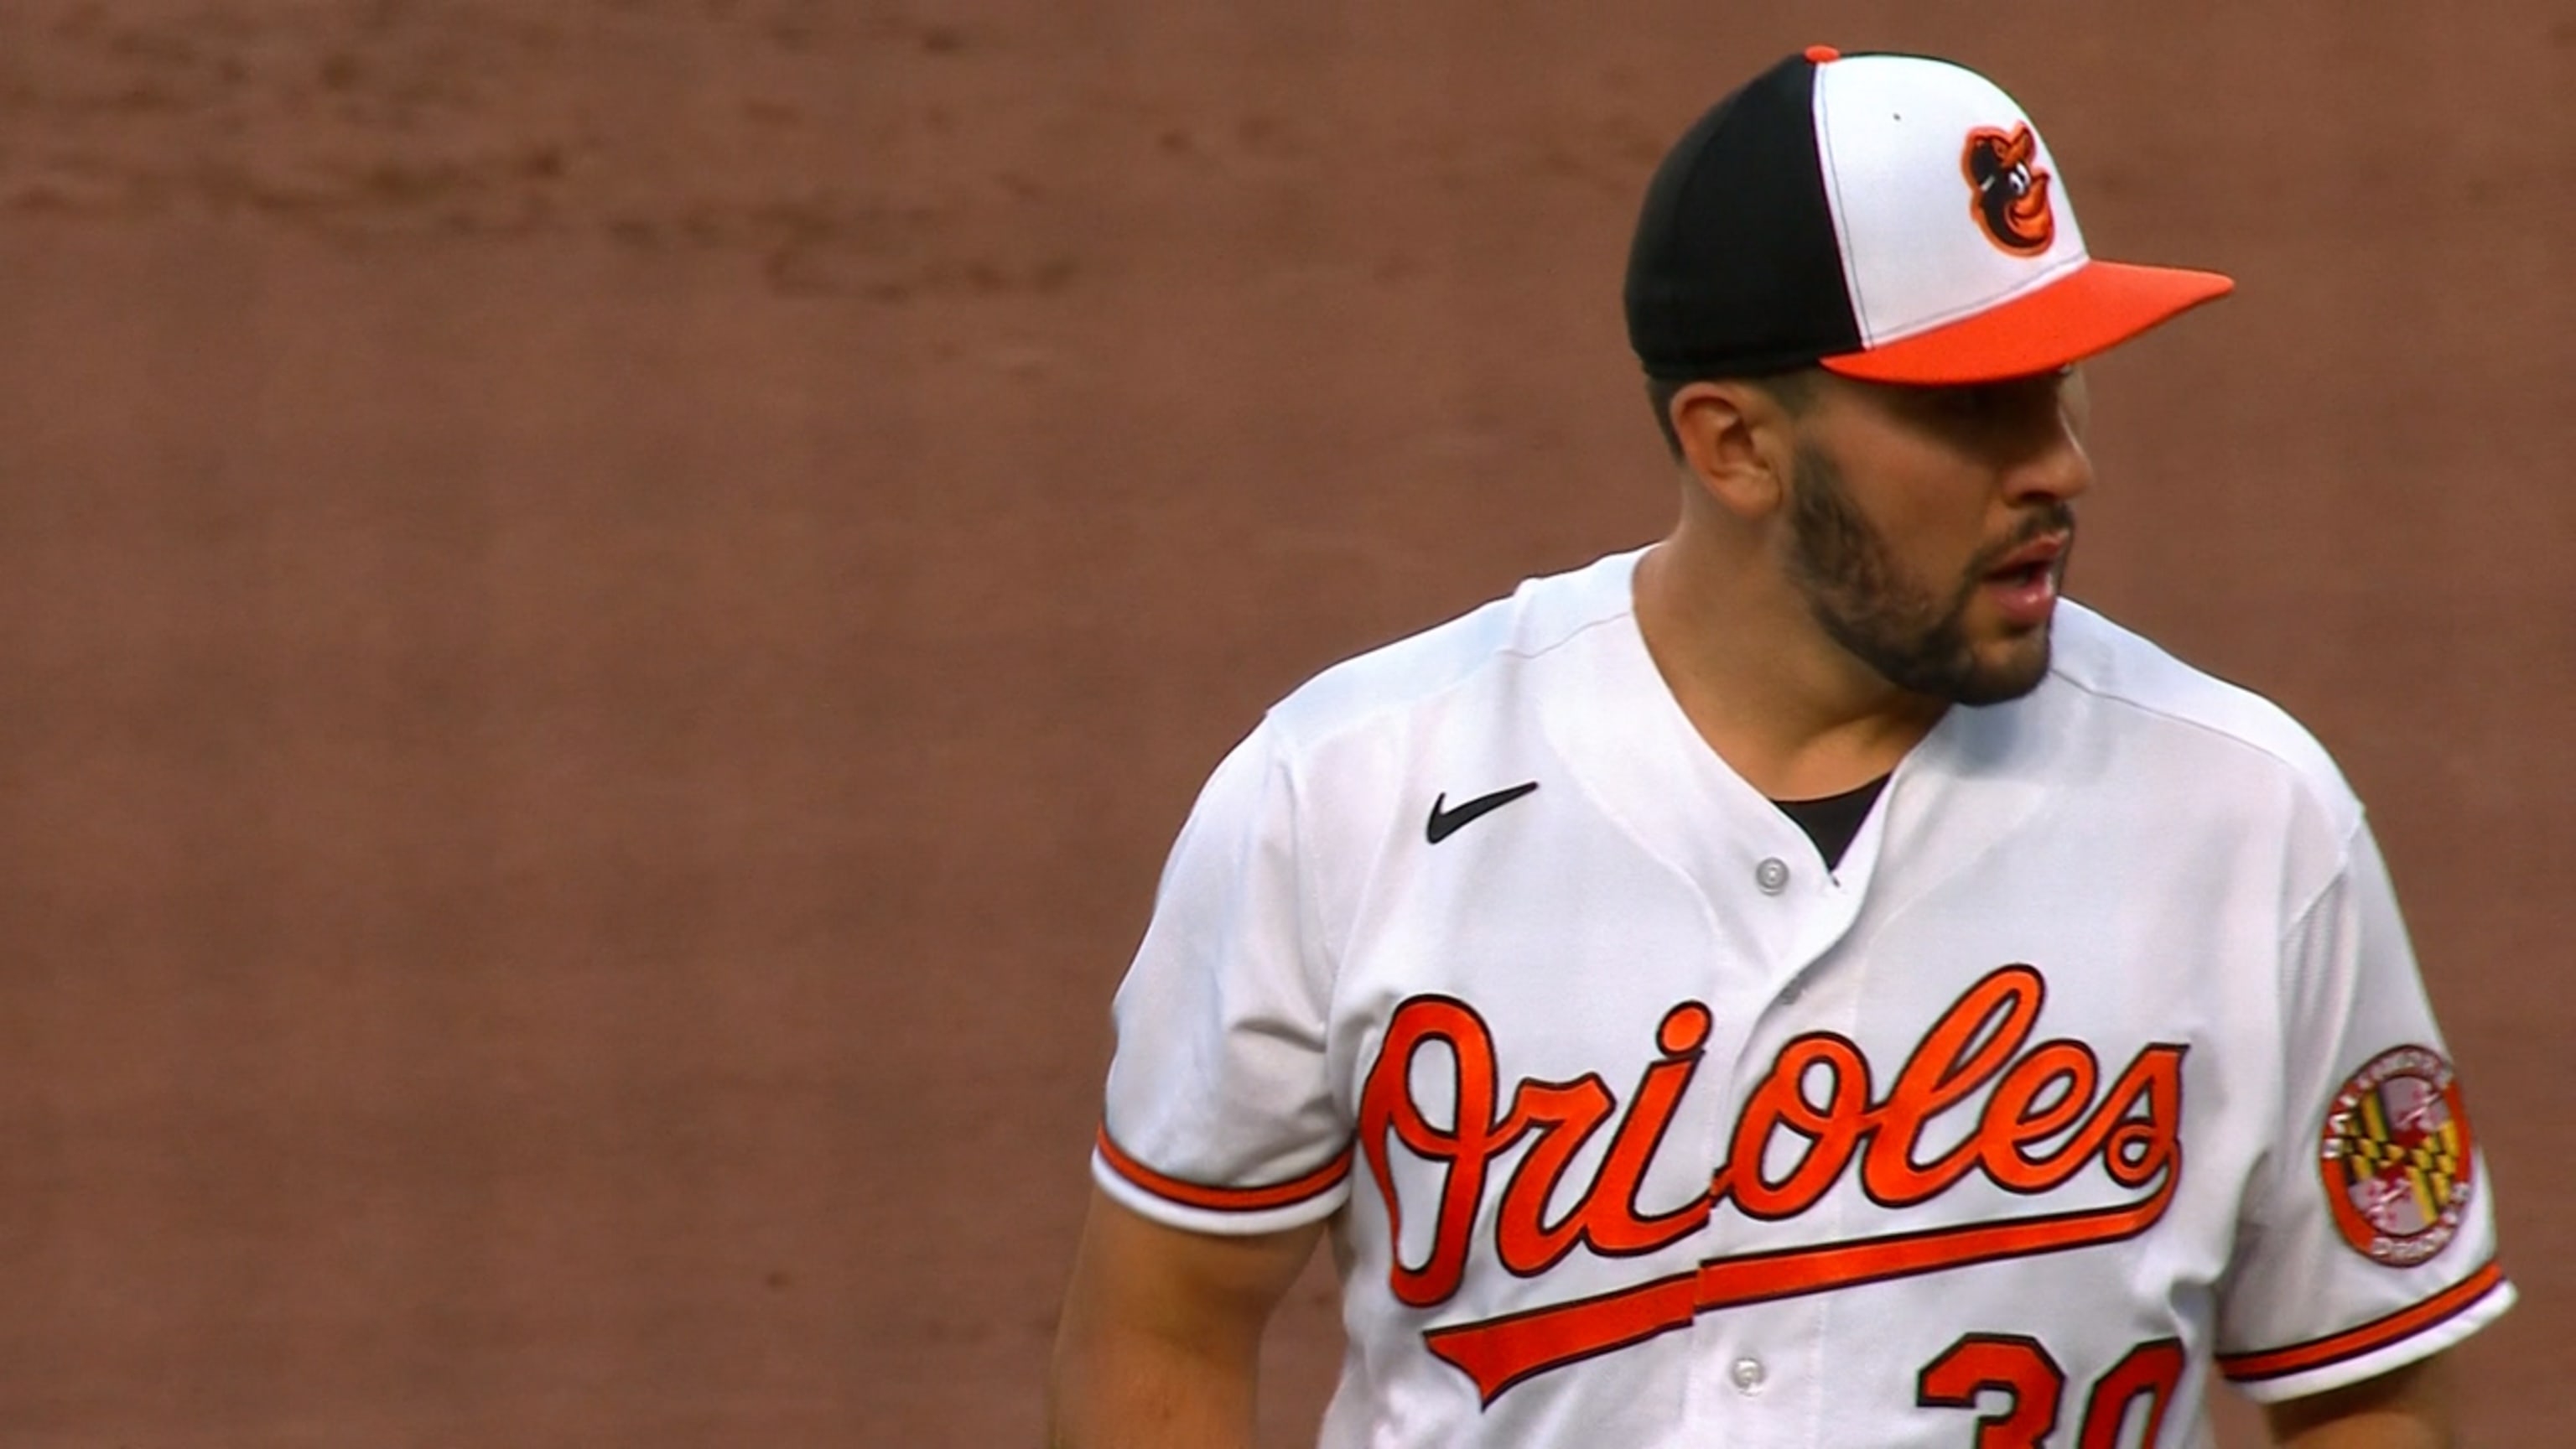 Rodriguez earns first major league win and Orioles split doubleheader  (updated) - Blog